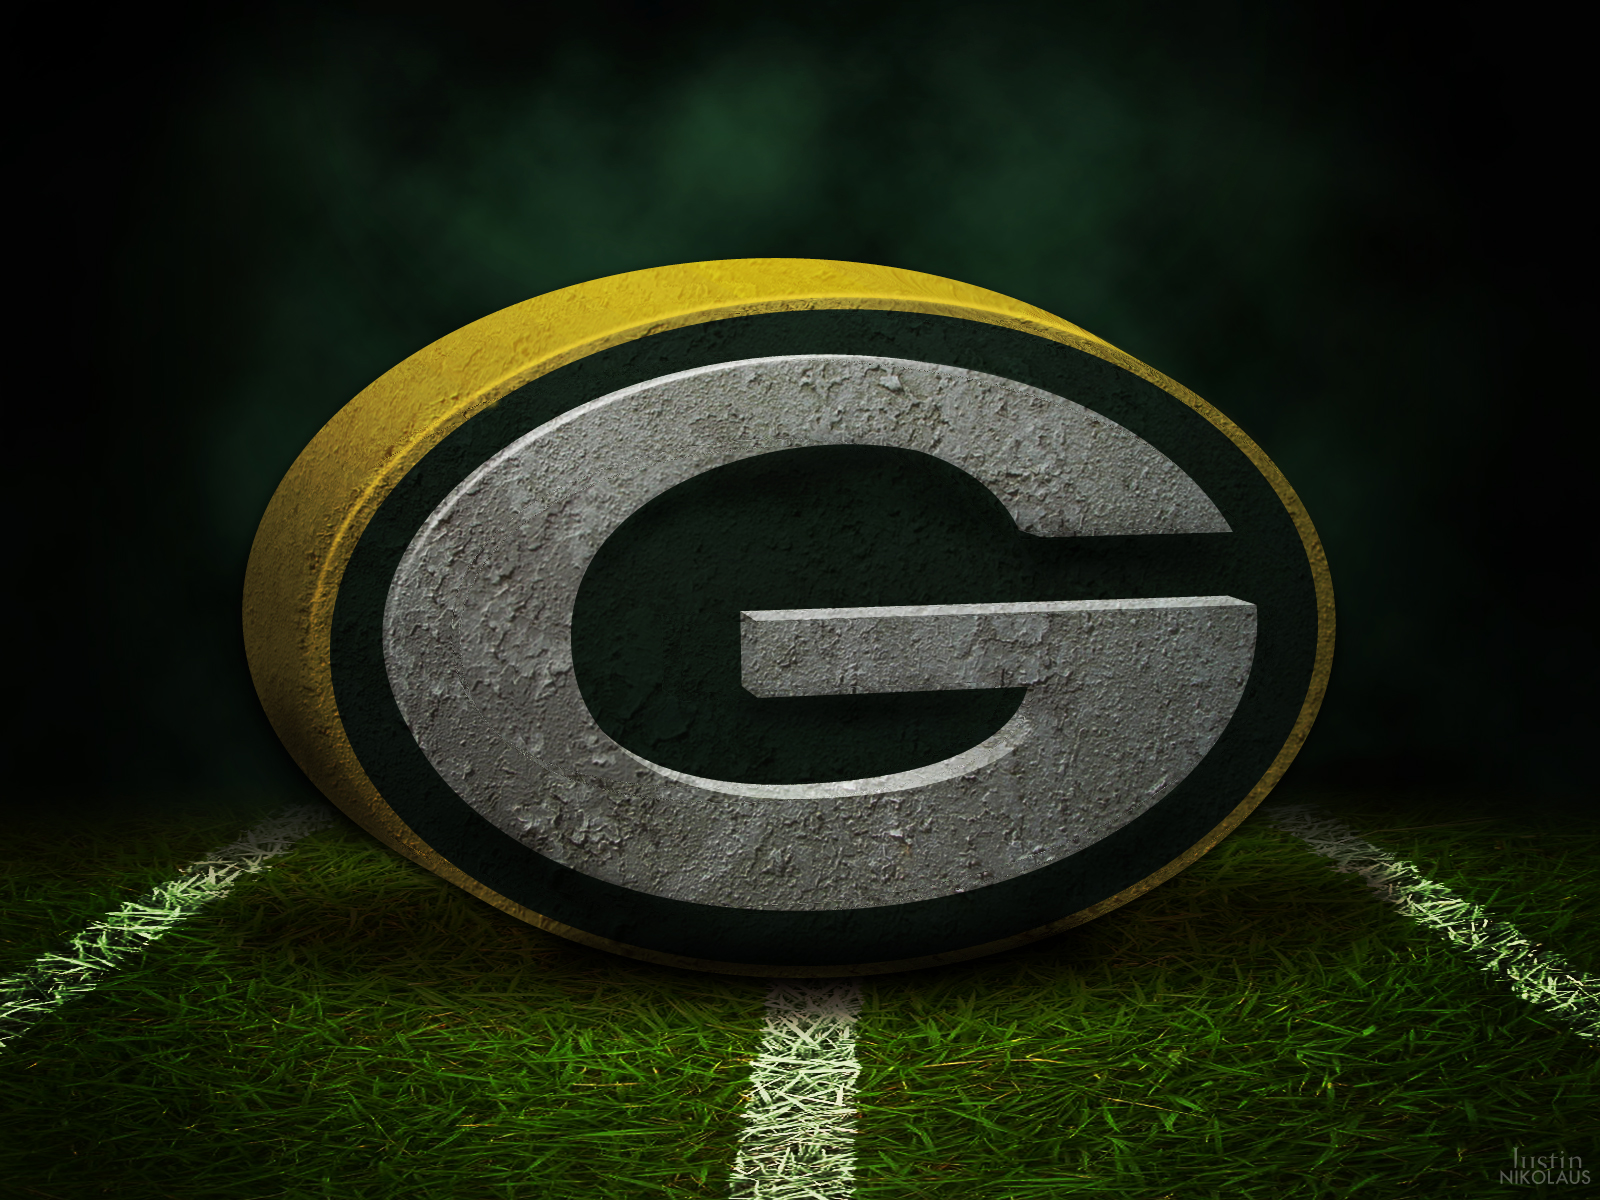 Free download Green Bay Packer Wallpapers 365 Days of Design [1600x1200